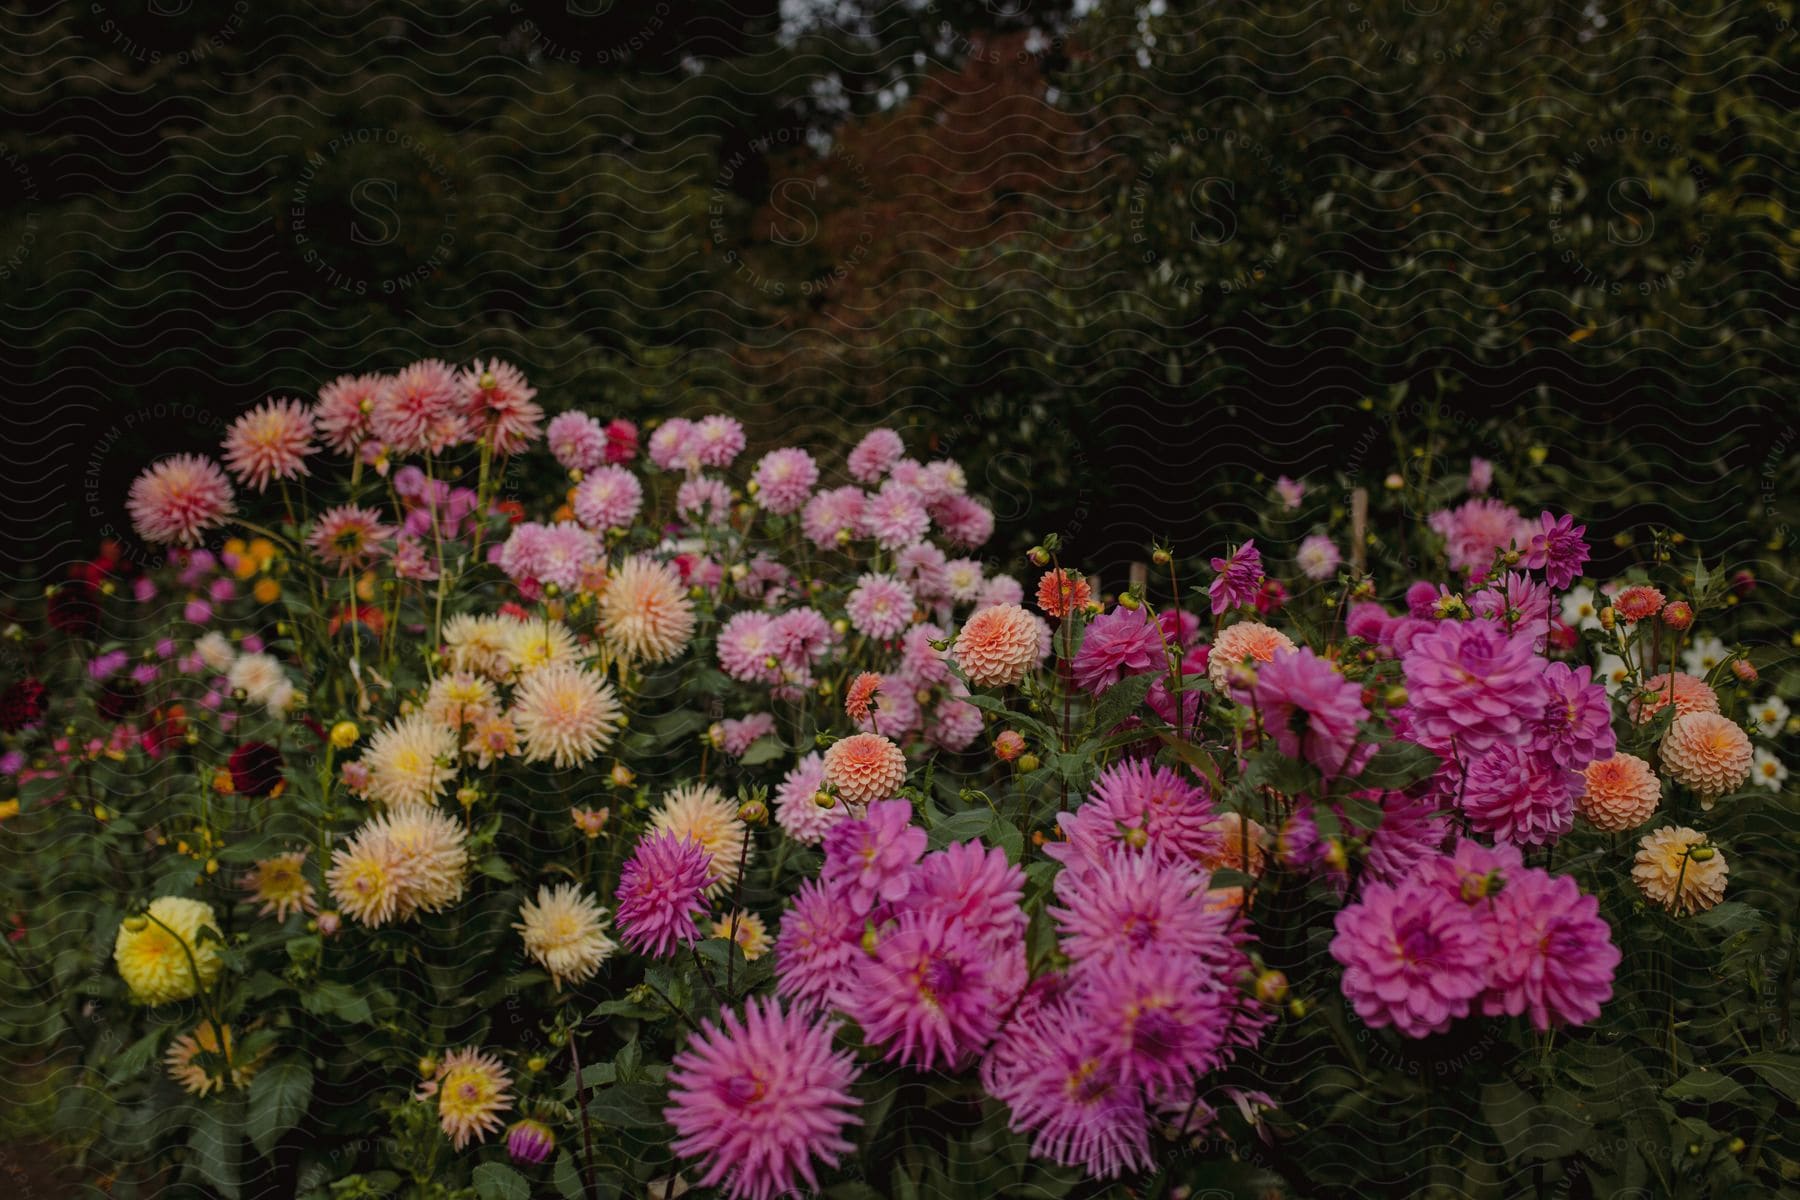 Bed of different colored chrysanthemums outside